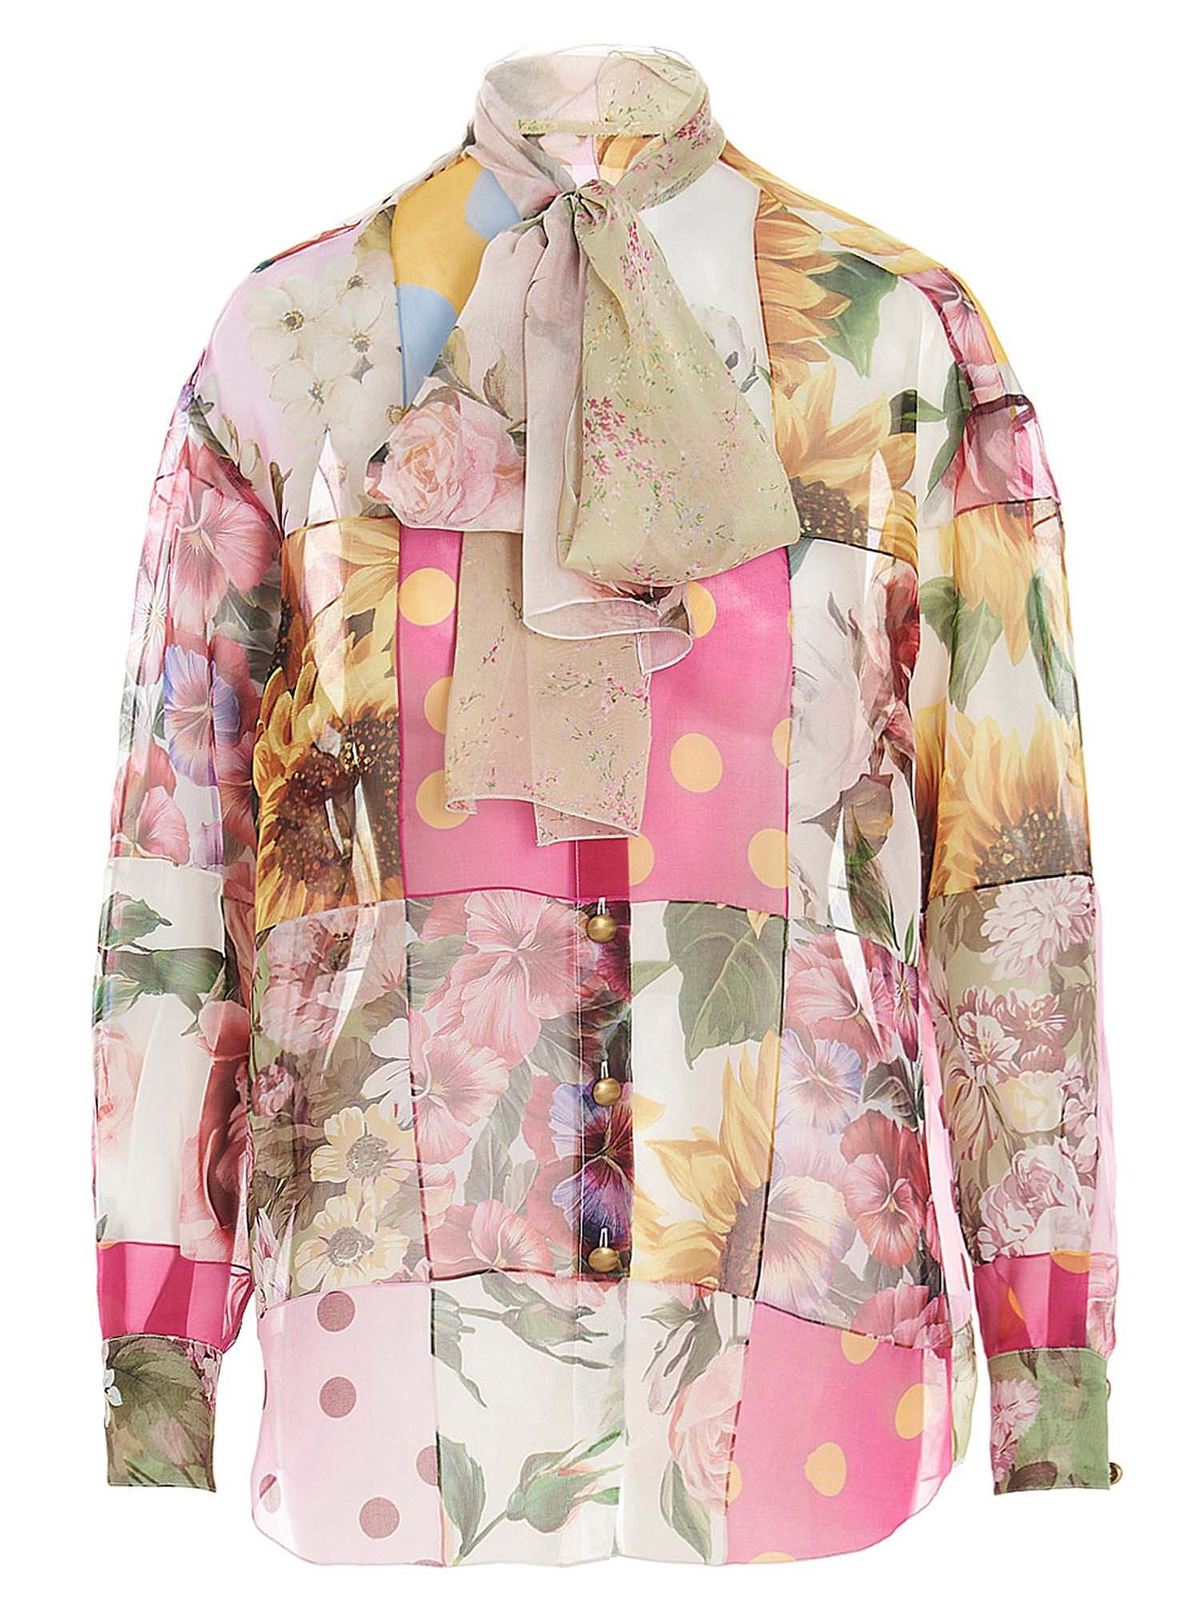 DOLCE & GABBANA PATCHWORK SHIRT IN MULTICOLOR